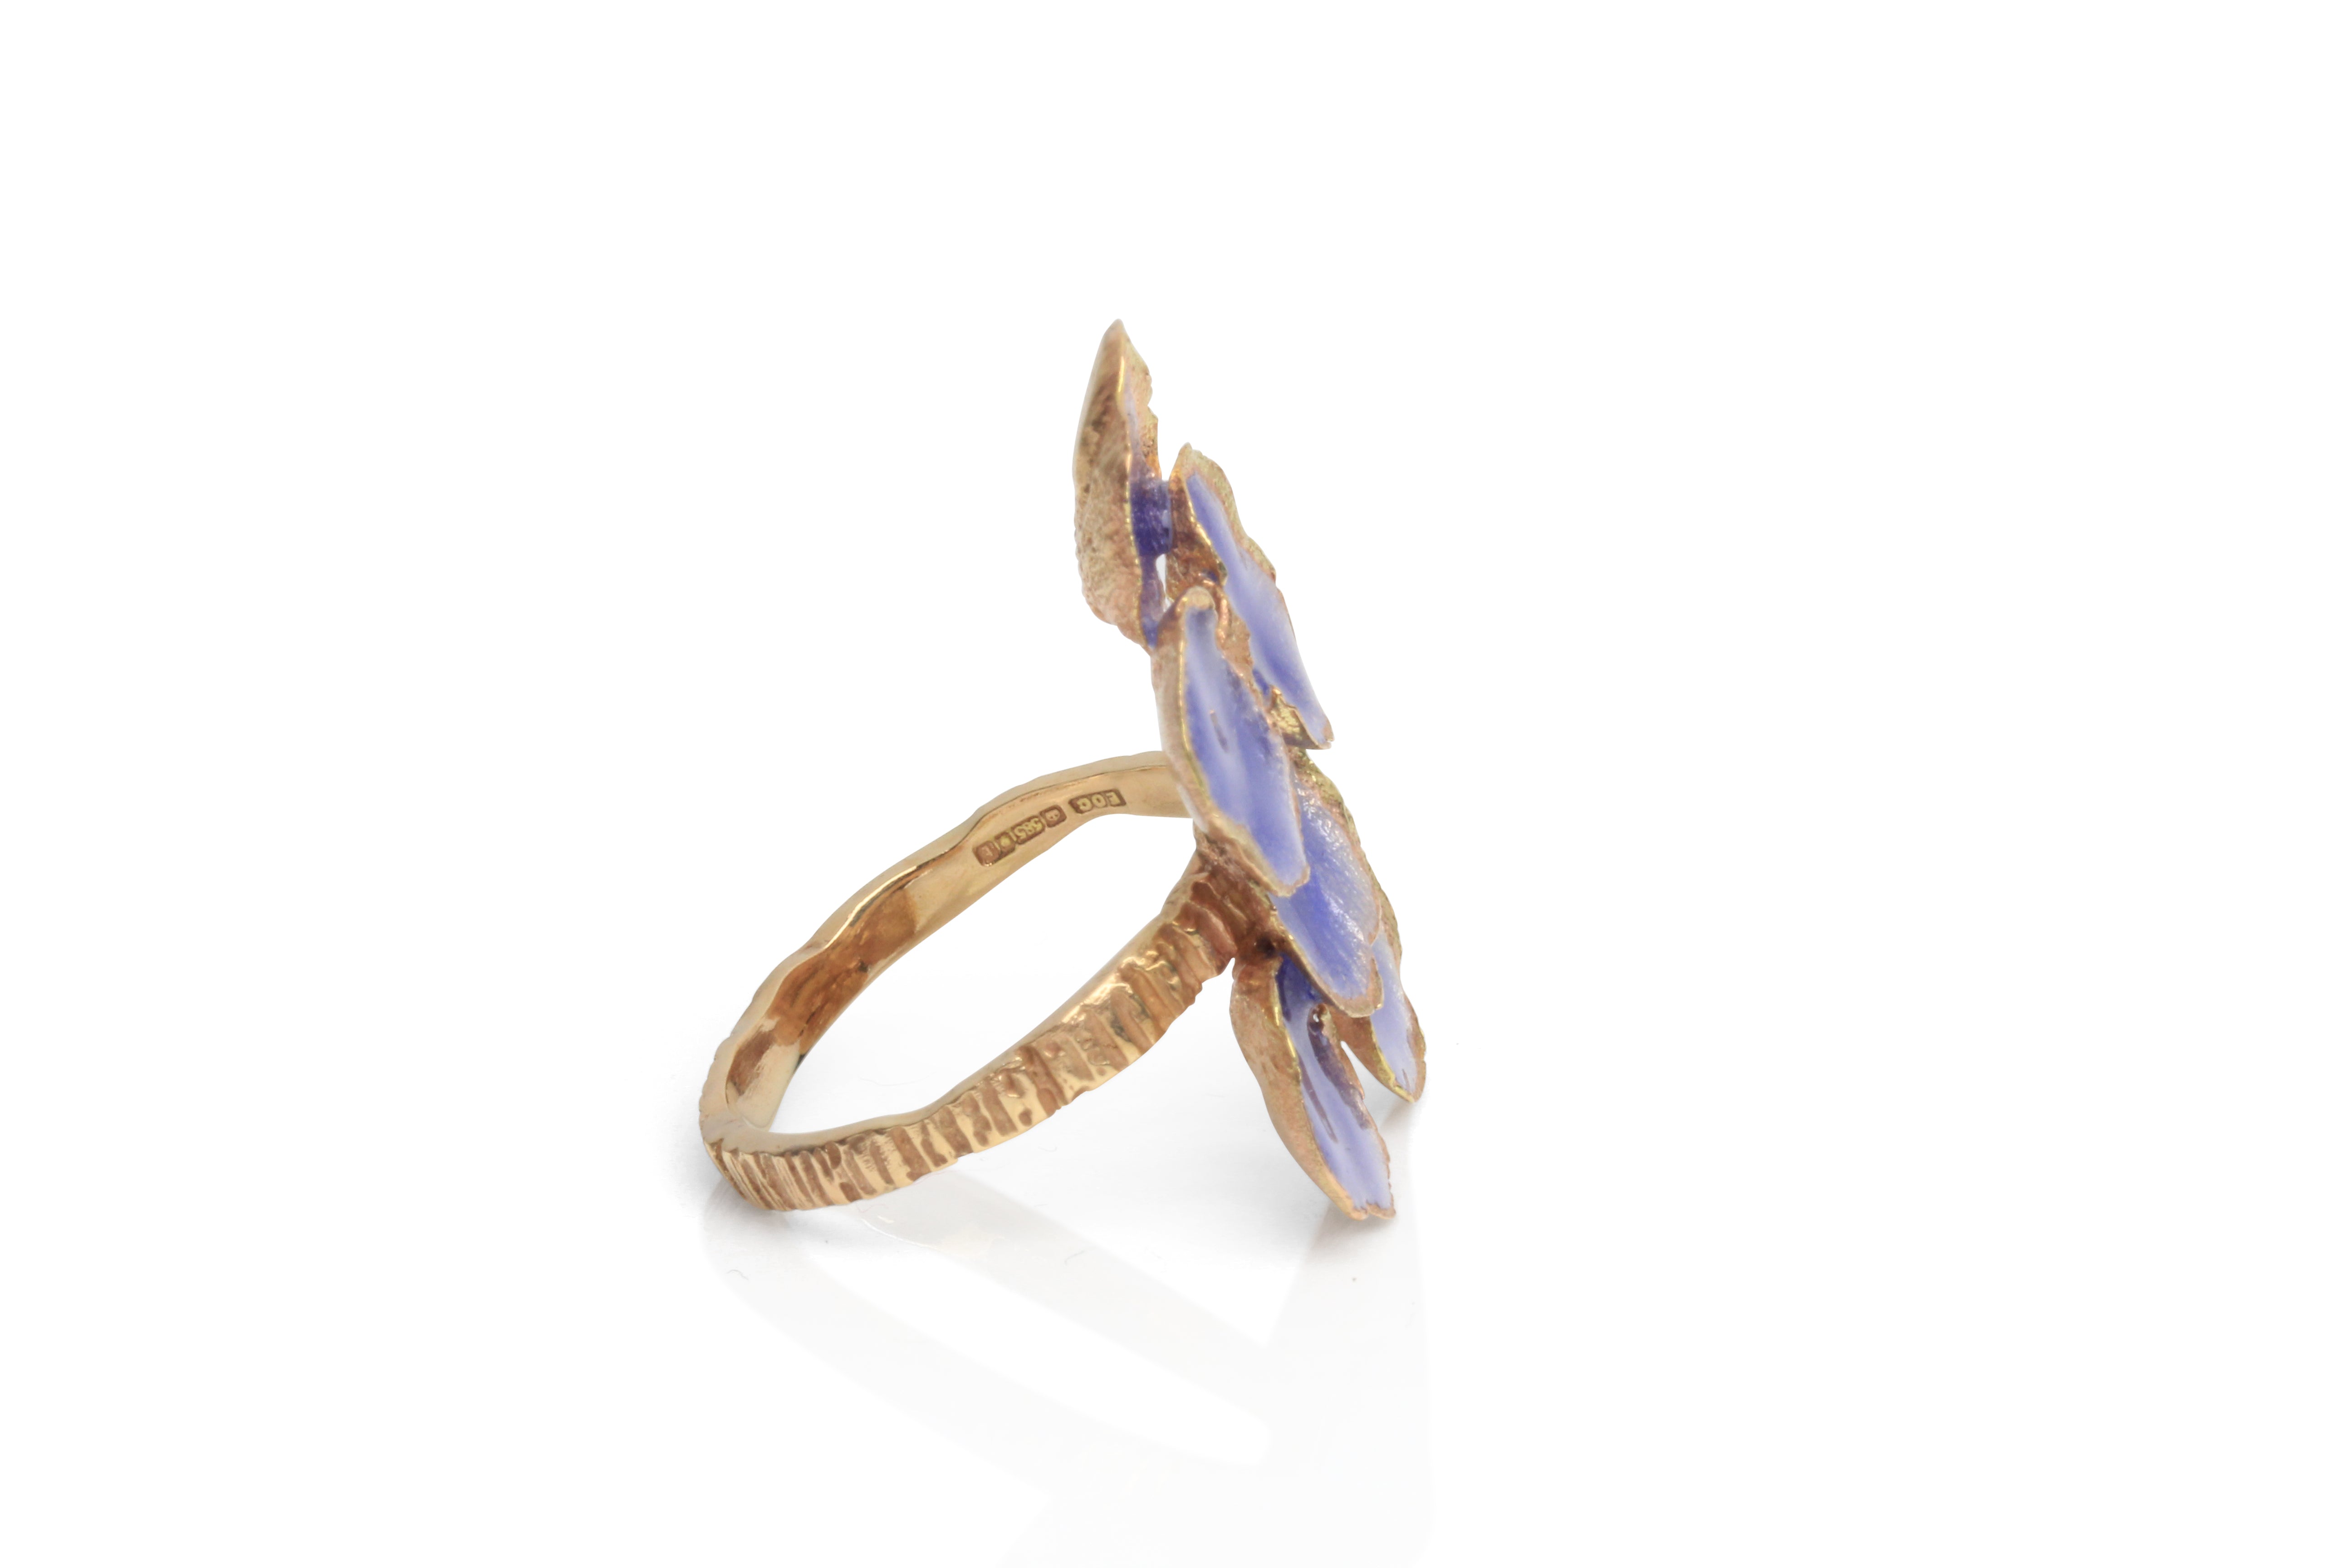 View showing hallmark of handmade ring by Eily O Connell with purple enamel.